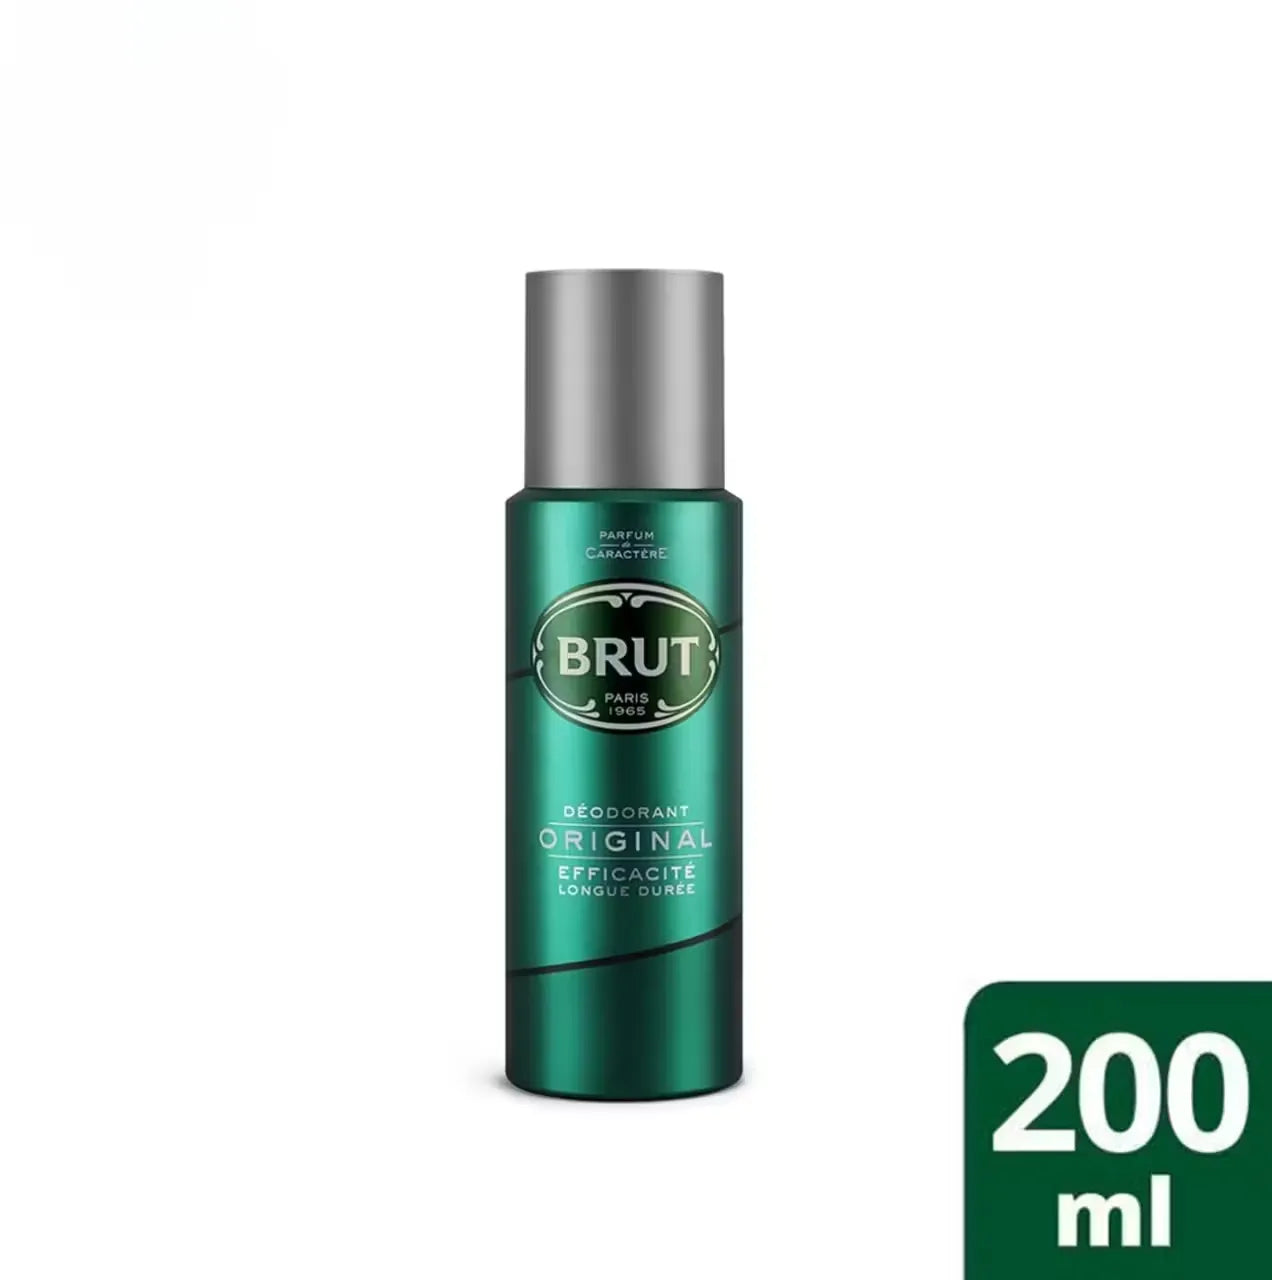 Classic Brut Original Deodorant spray bottle (200ml) with red and blue accents, positioned against a white background.